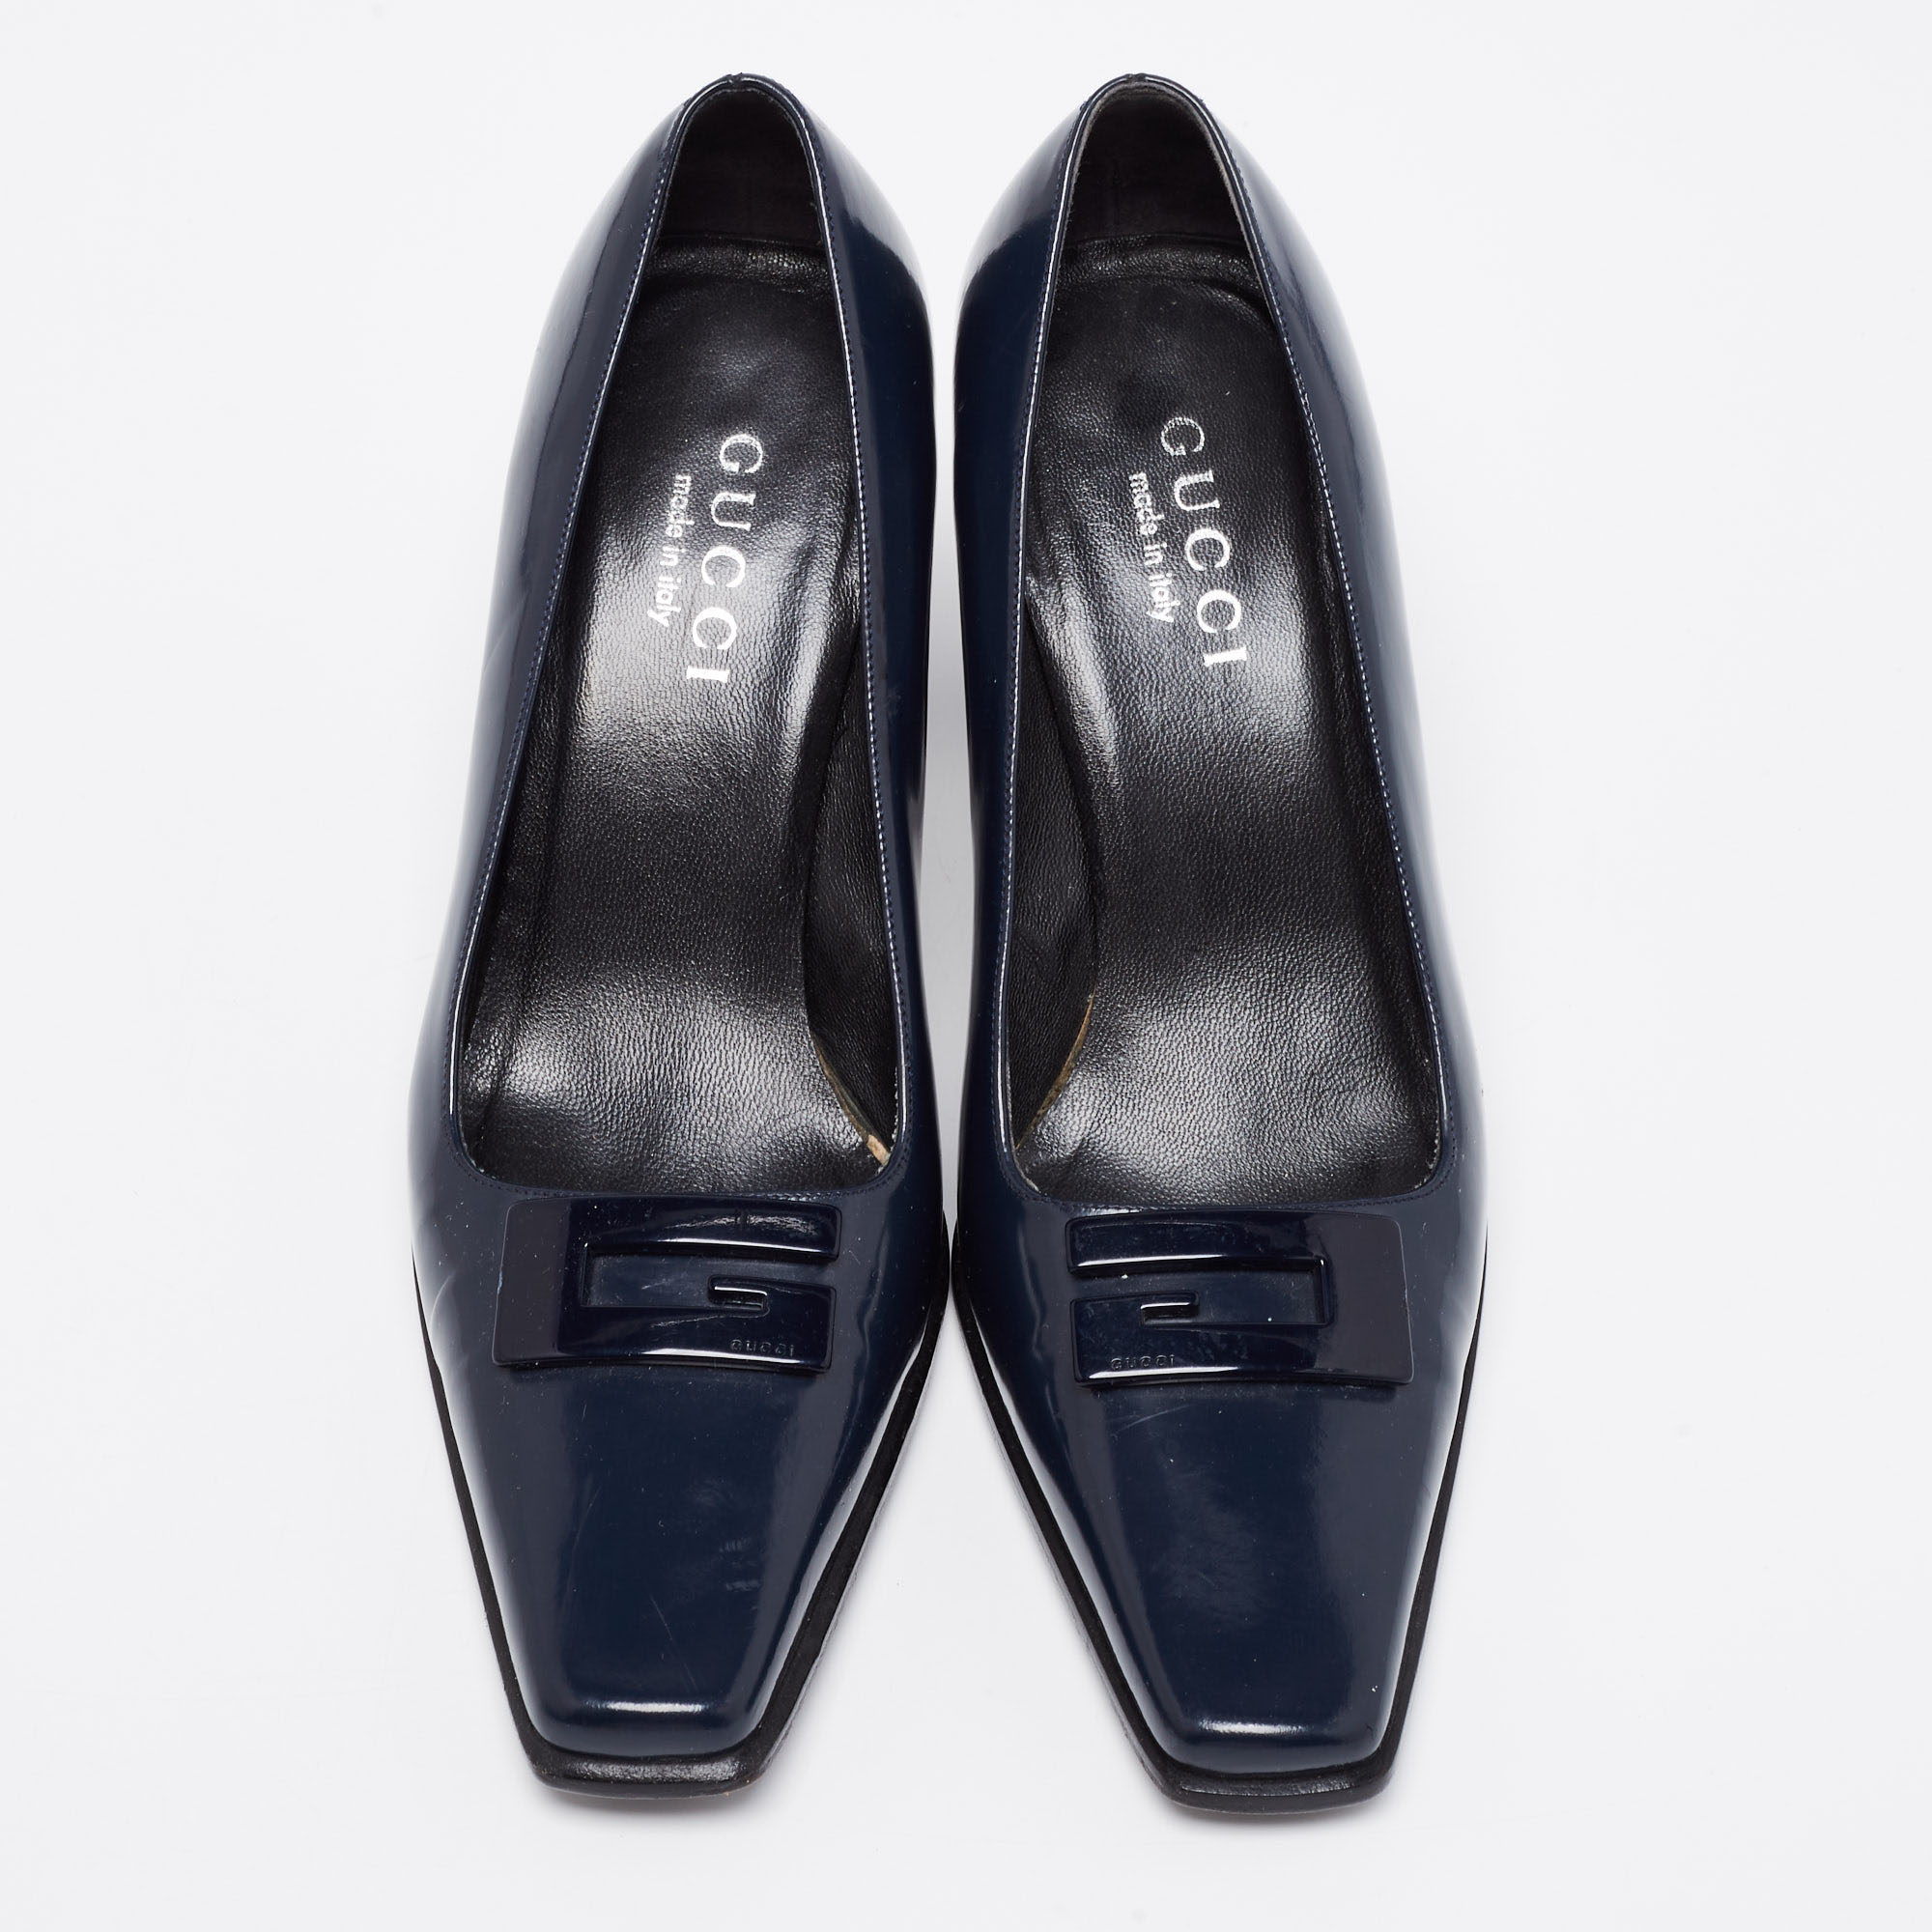 Gucci Midnight Blue Patent Leather Square-Toe Pumps Size 36.5